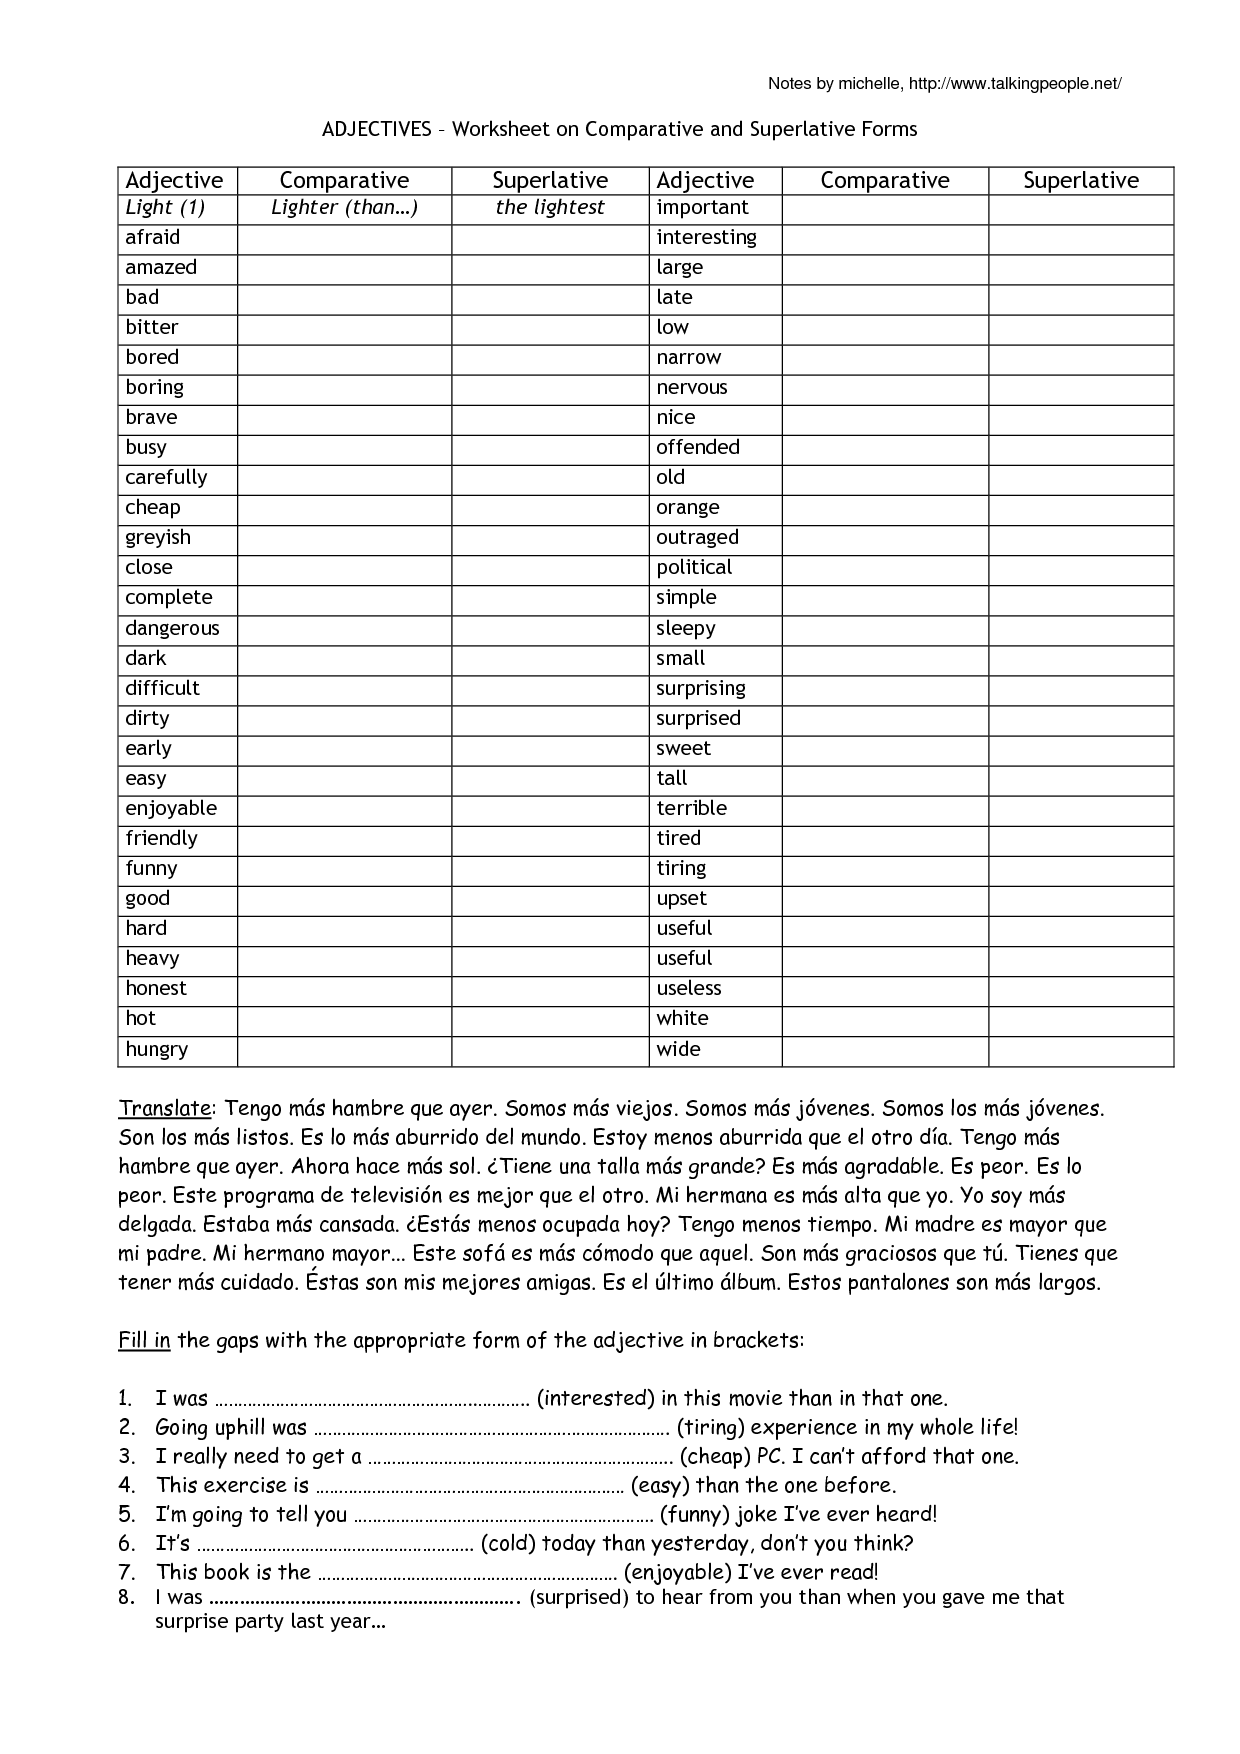 comparative-and-superlative-adjectives-the-moffatt-girls-comparative-adjectives-worksheet